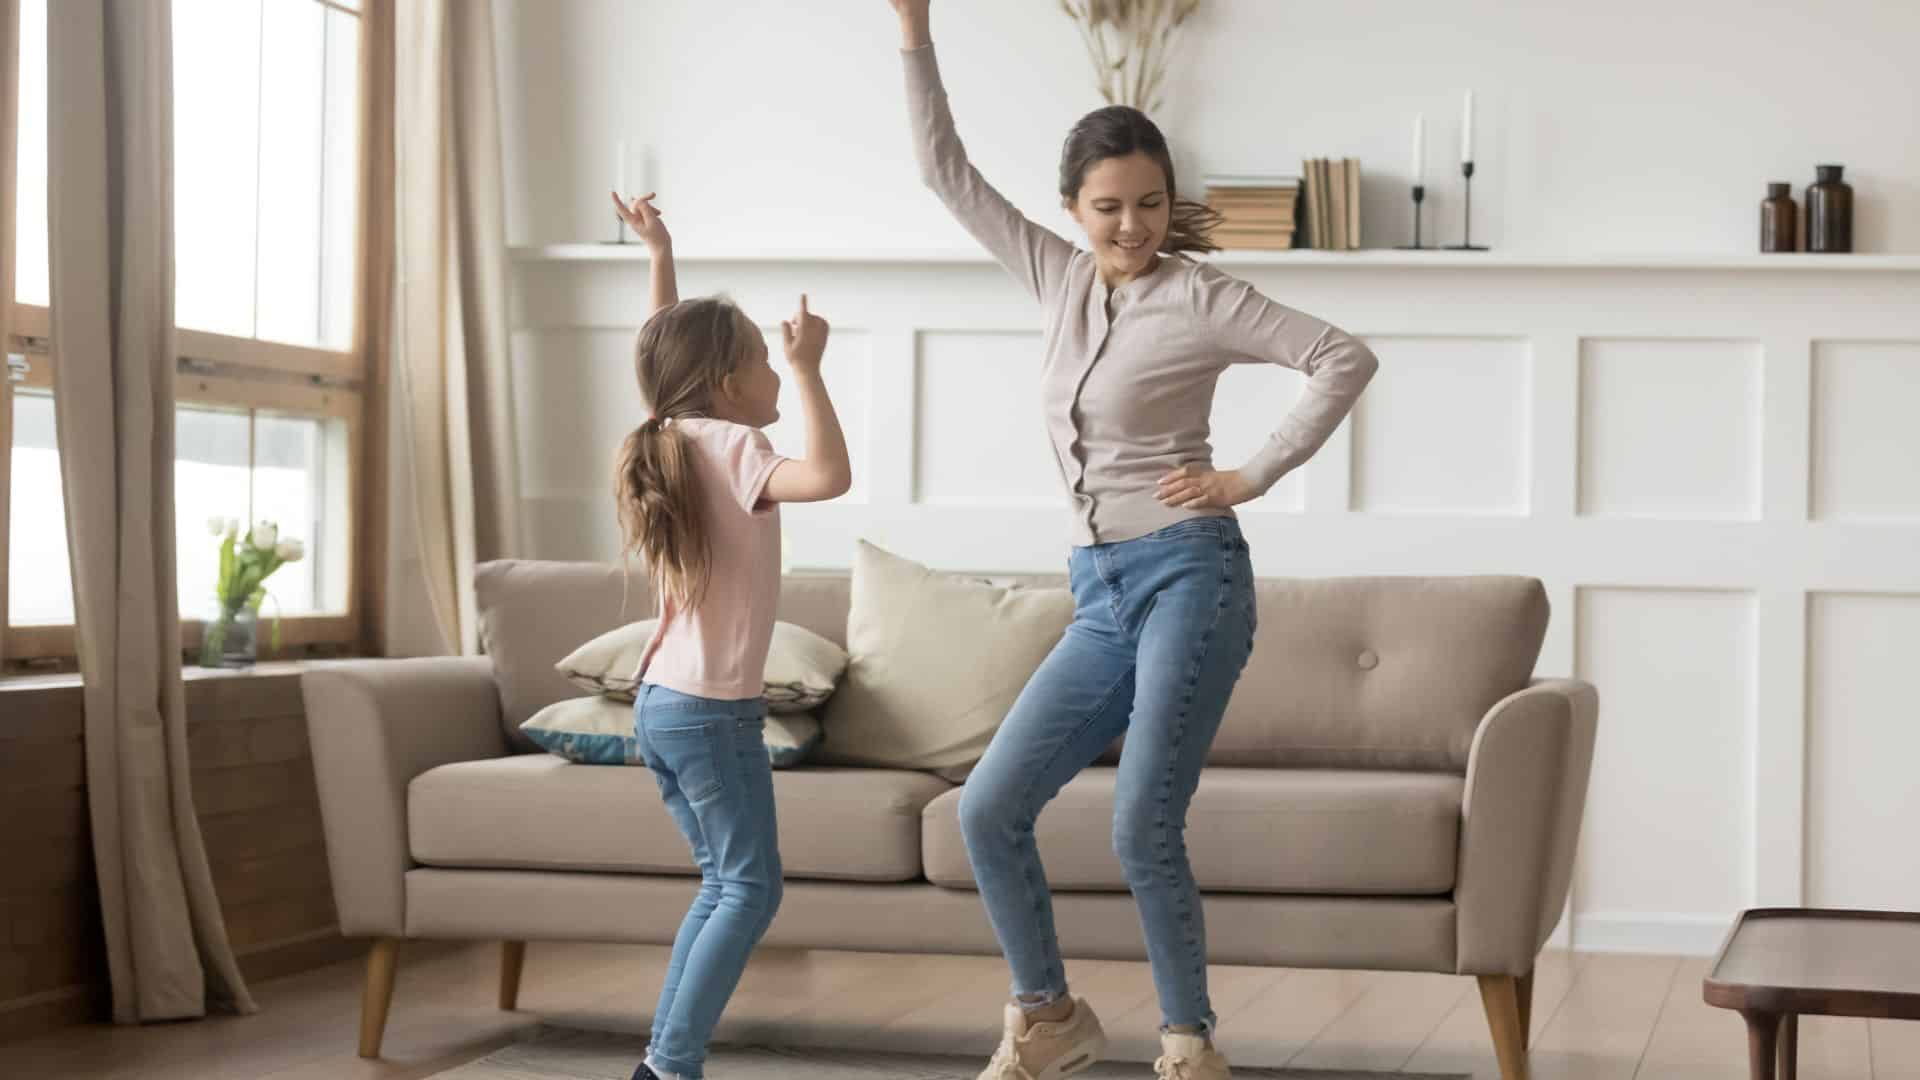 Young women dancing with child in living room